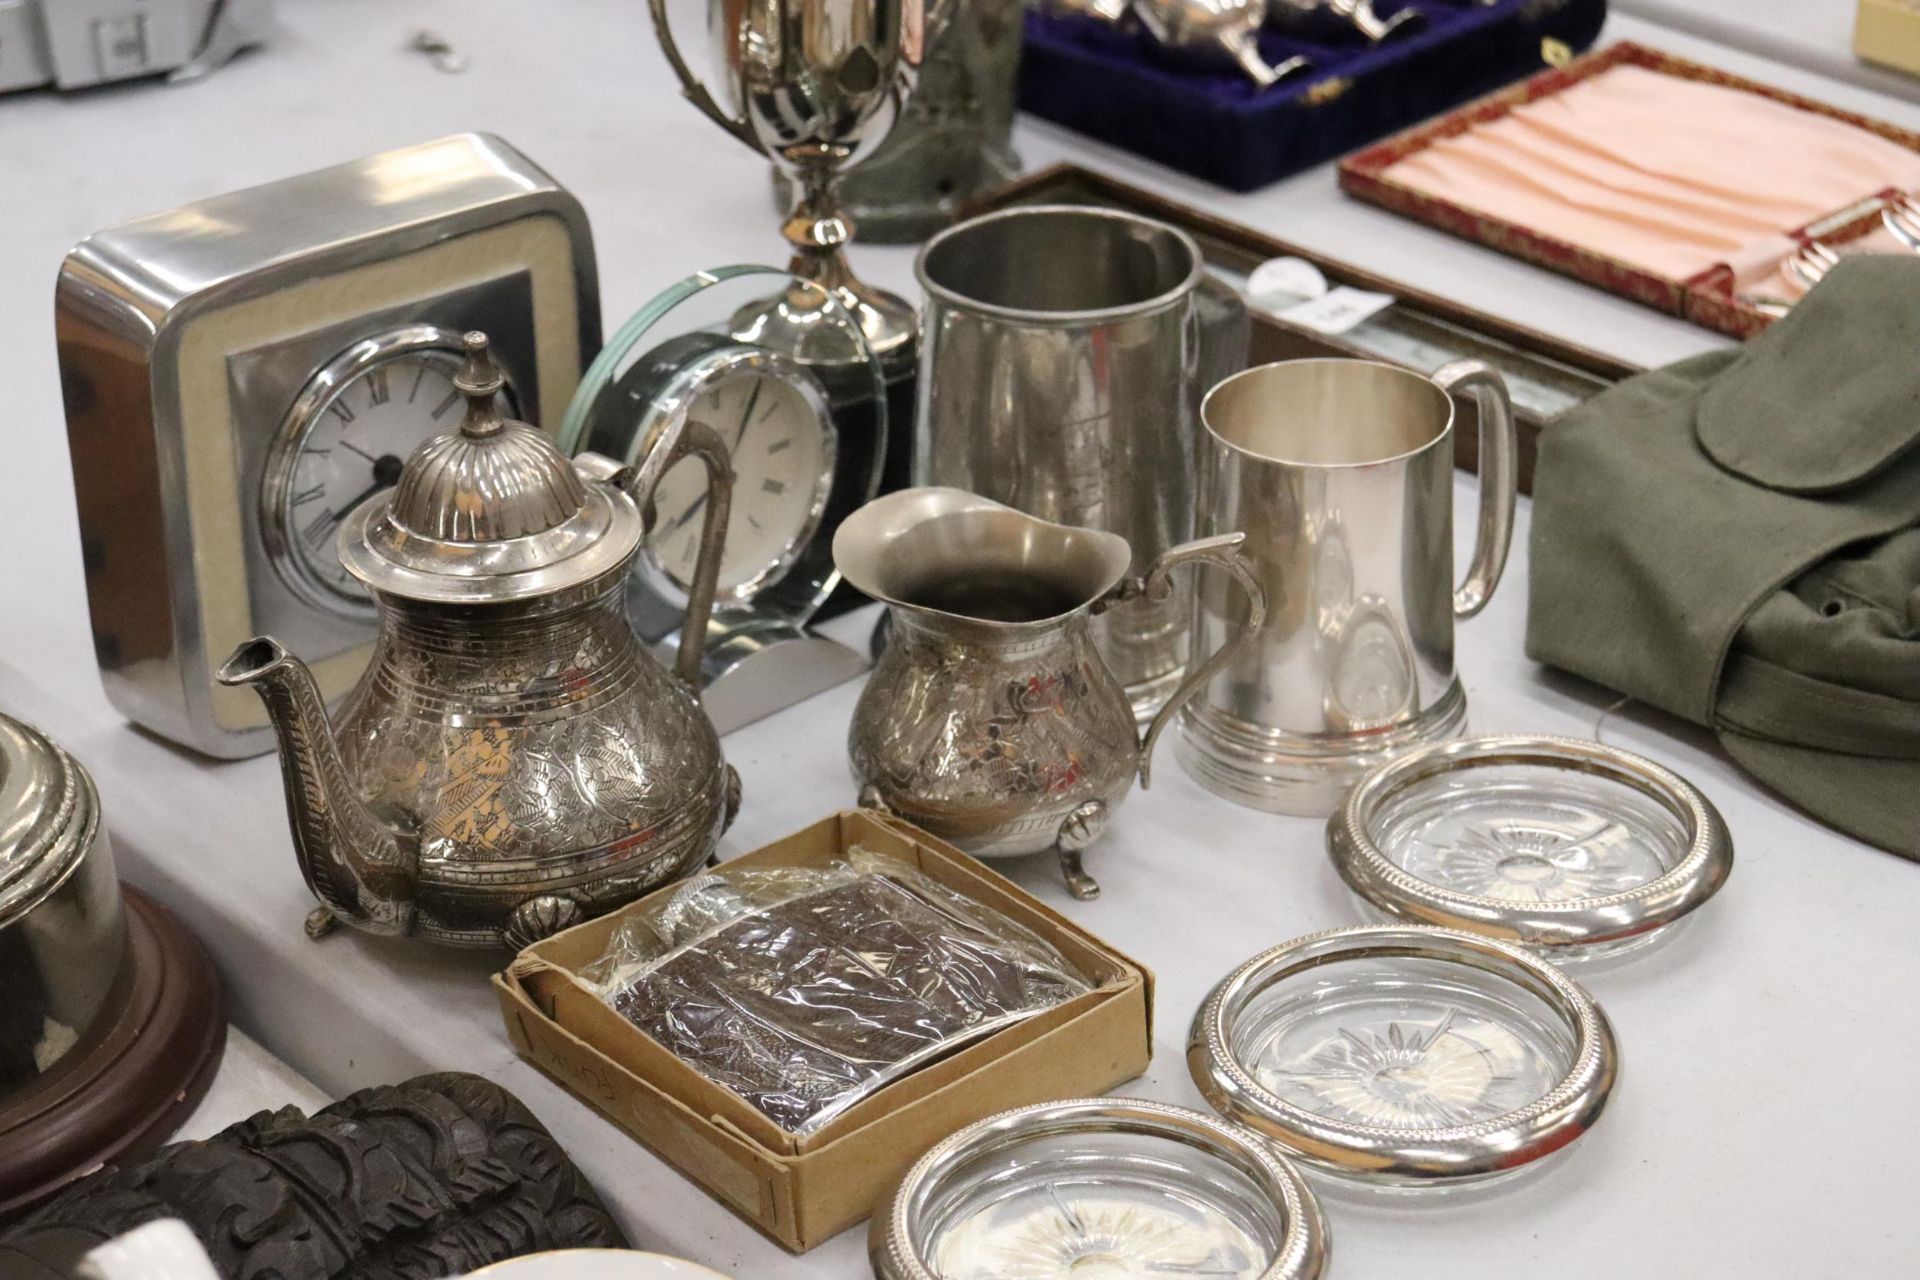 A QUANTITY OF SILVER PLATED ITEMS TO INCLUDE A TEAPOT, TANKARDS, A TROPHY, HIP FLASK, CLOCKS, ETC - Image 2 of 12